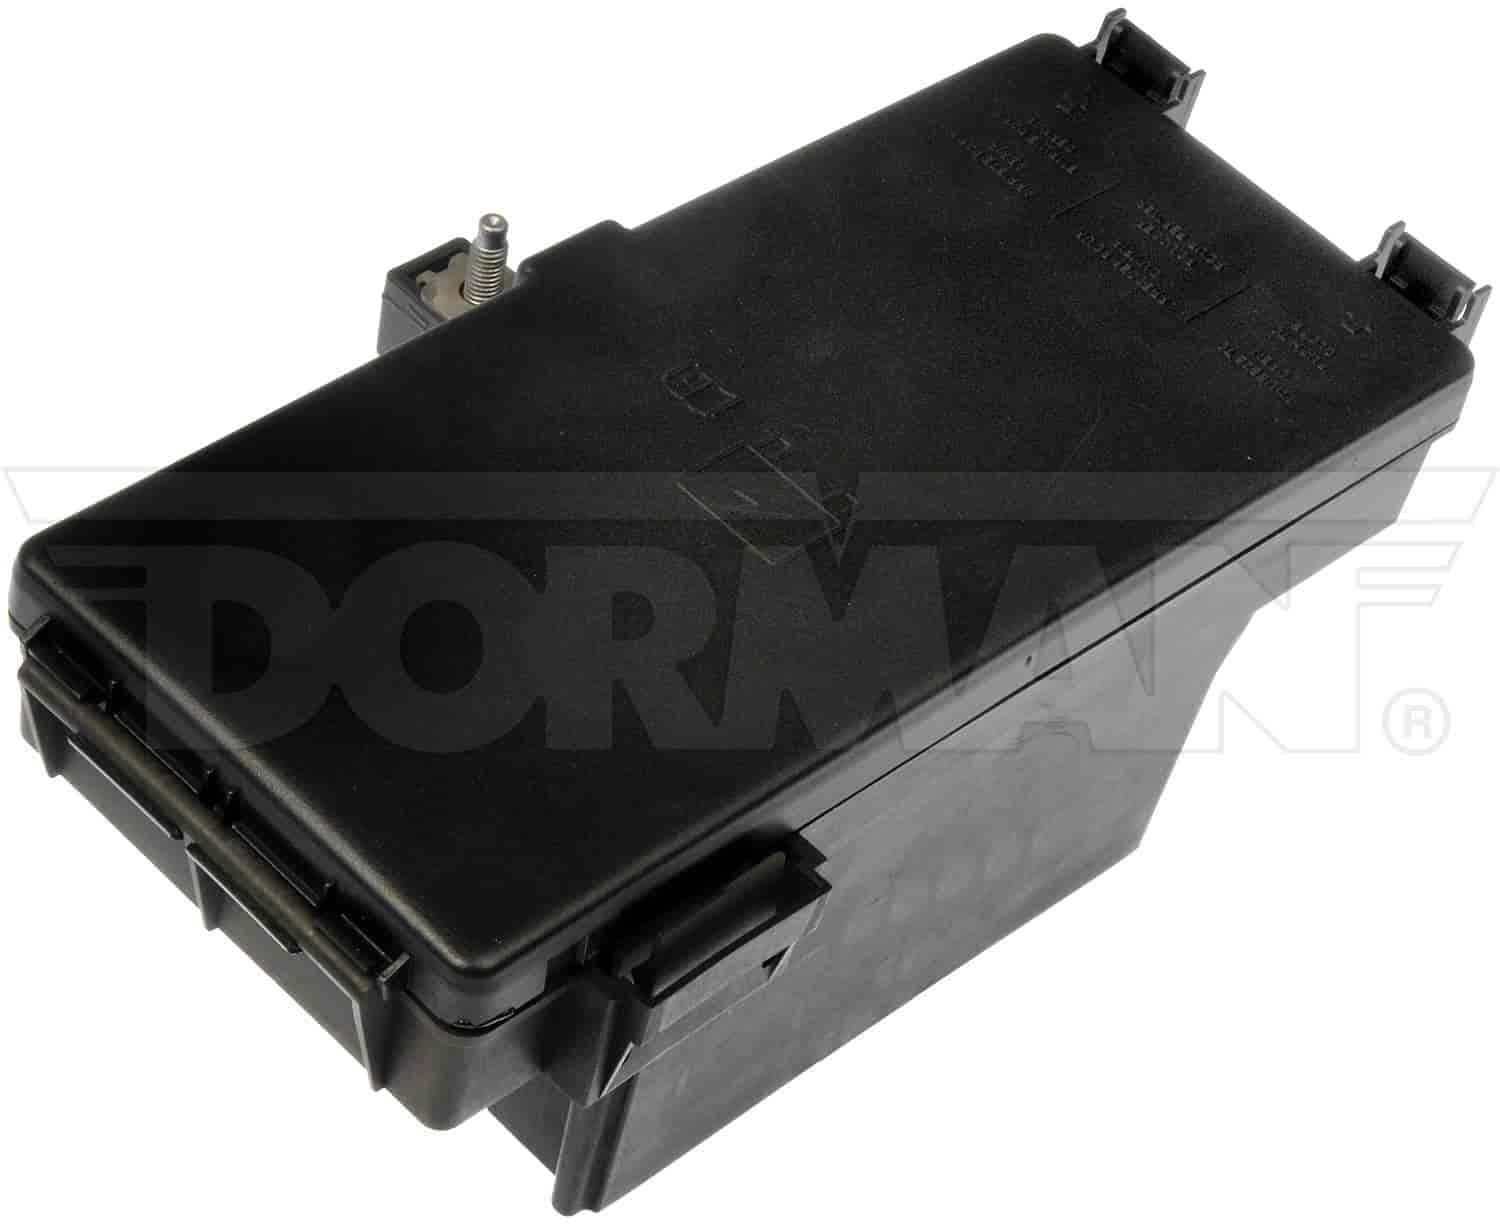 Remanufactured Totally Integrated Power Module for 2006 Dodge Ram 2500, 3500 Pickup Trucks [Diesel Engine]